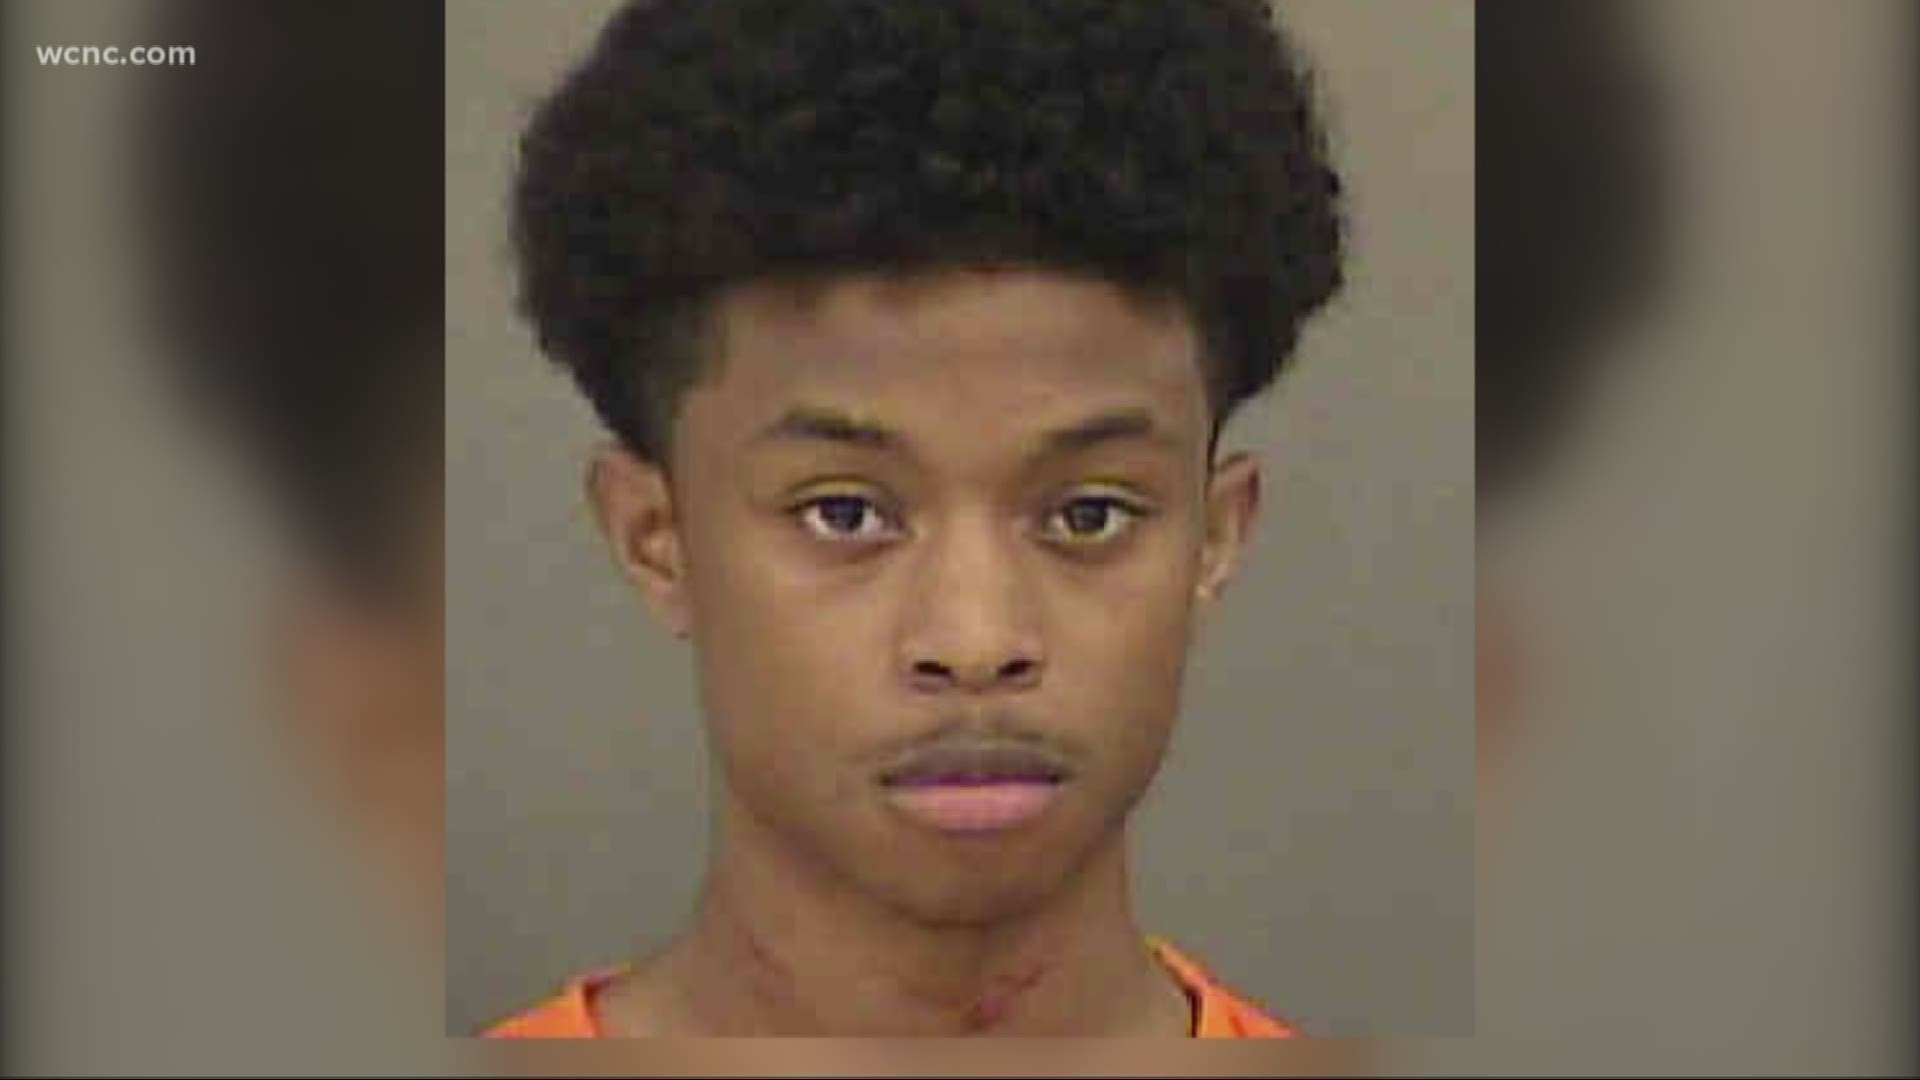 A 19-year-old man is behind bars after police said he fatally stabbed his brother Wednesday night.